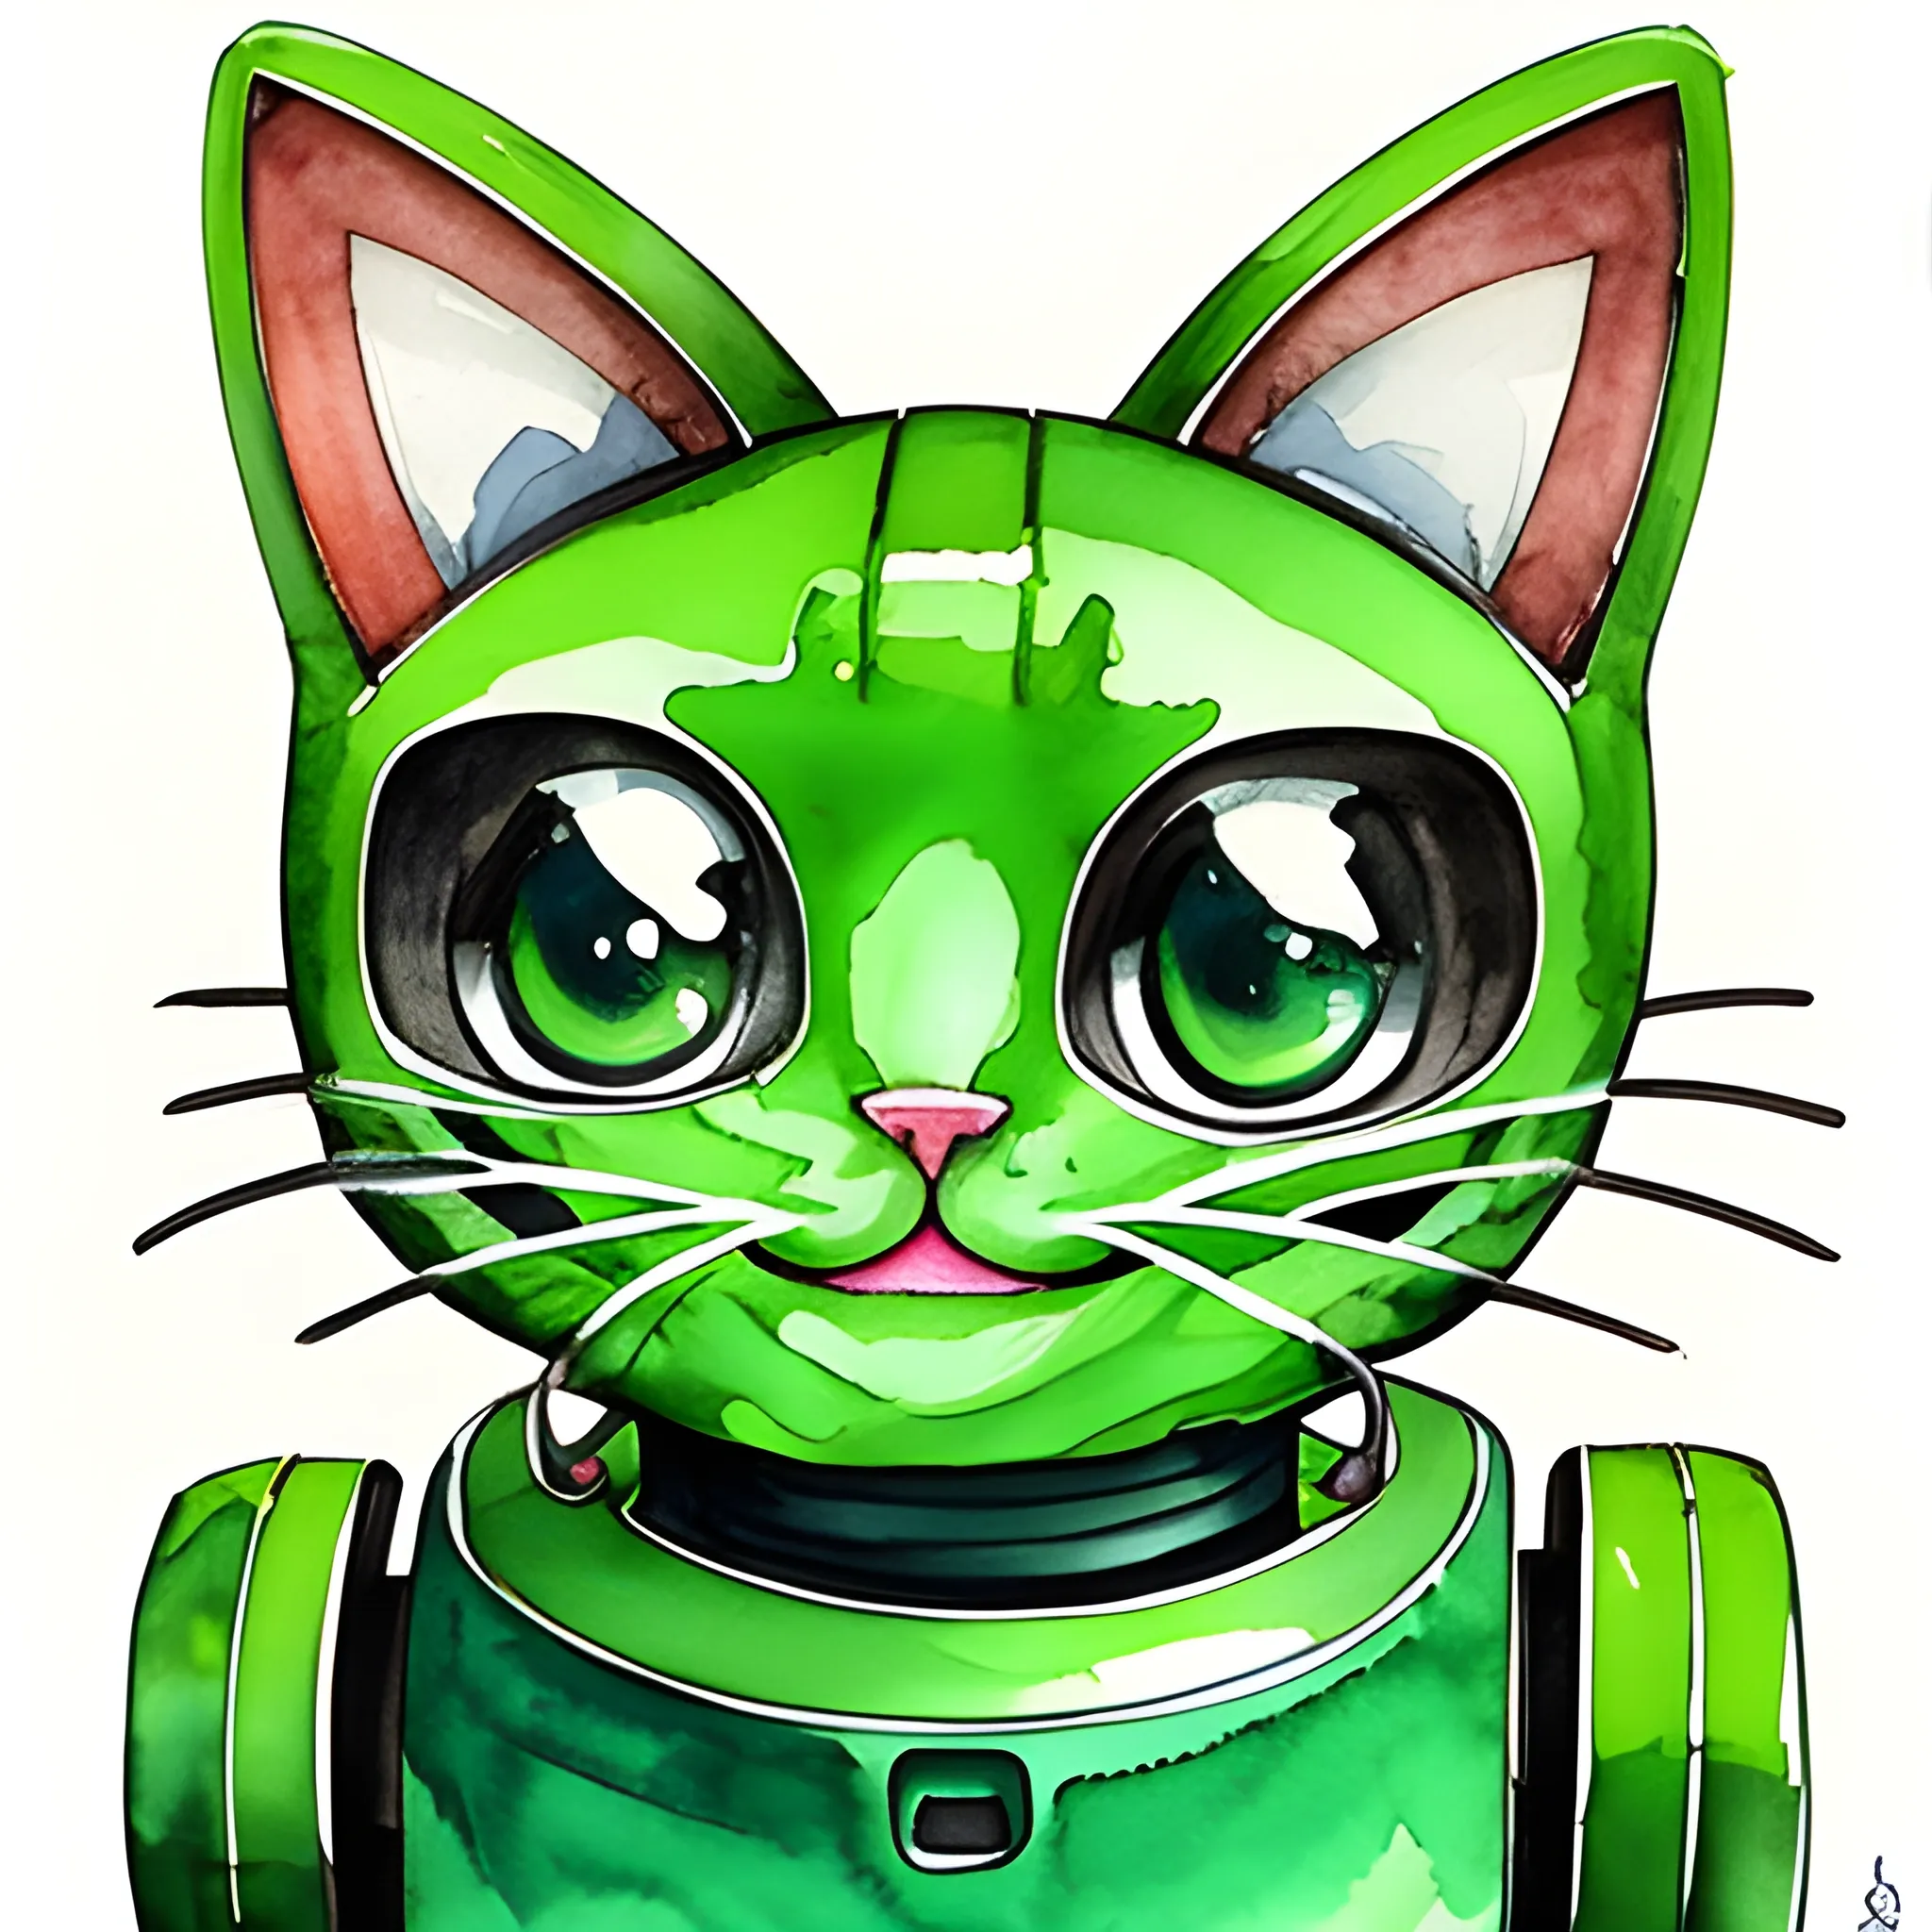 Adorable Green Cat robot smile 
, Water Color